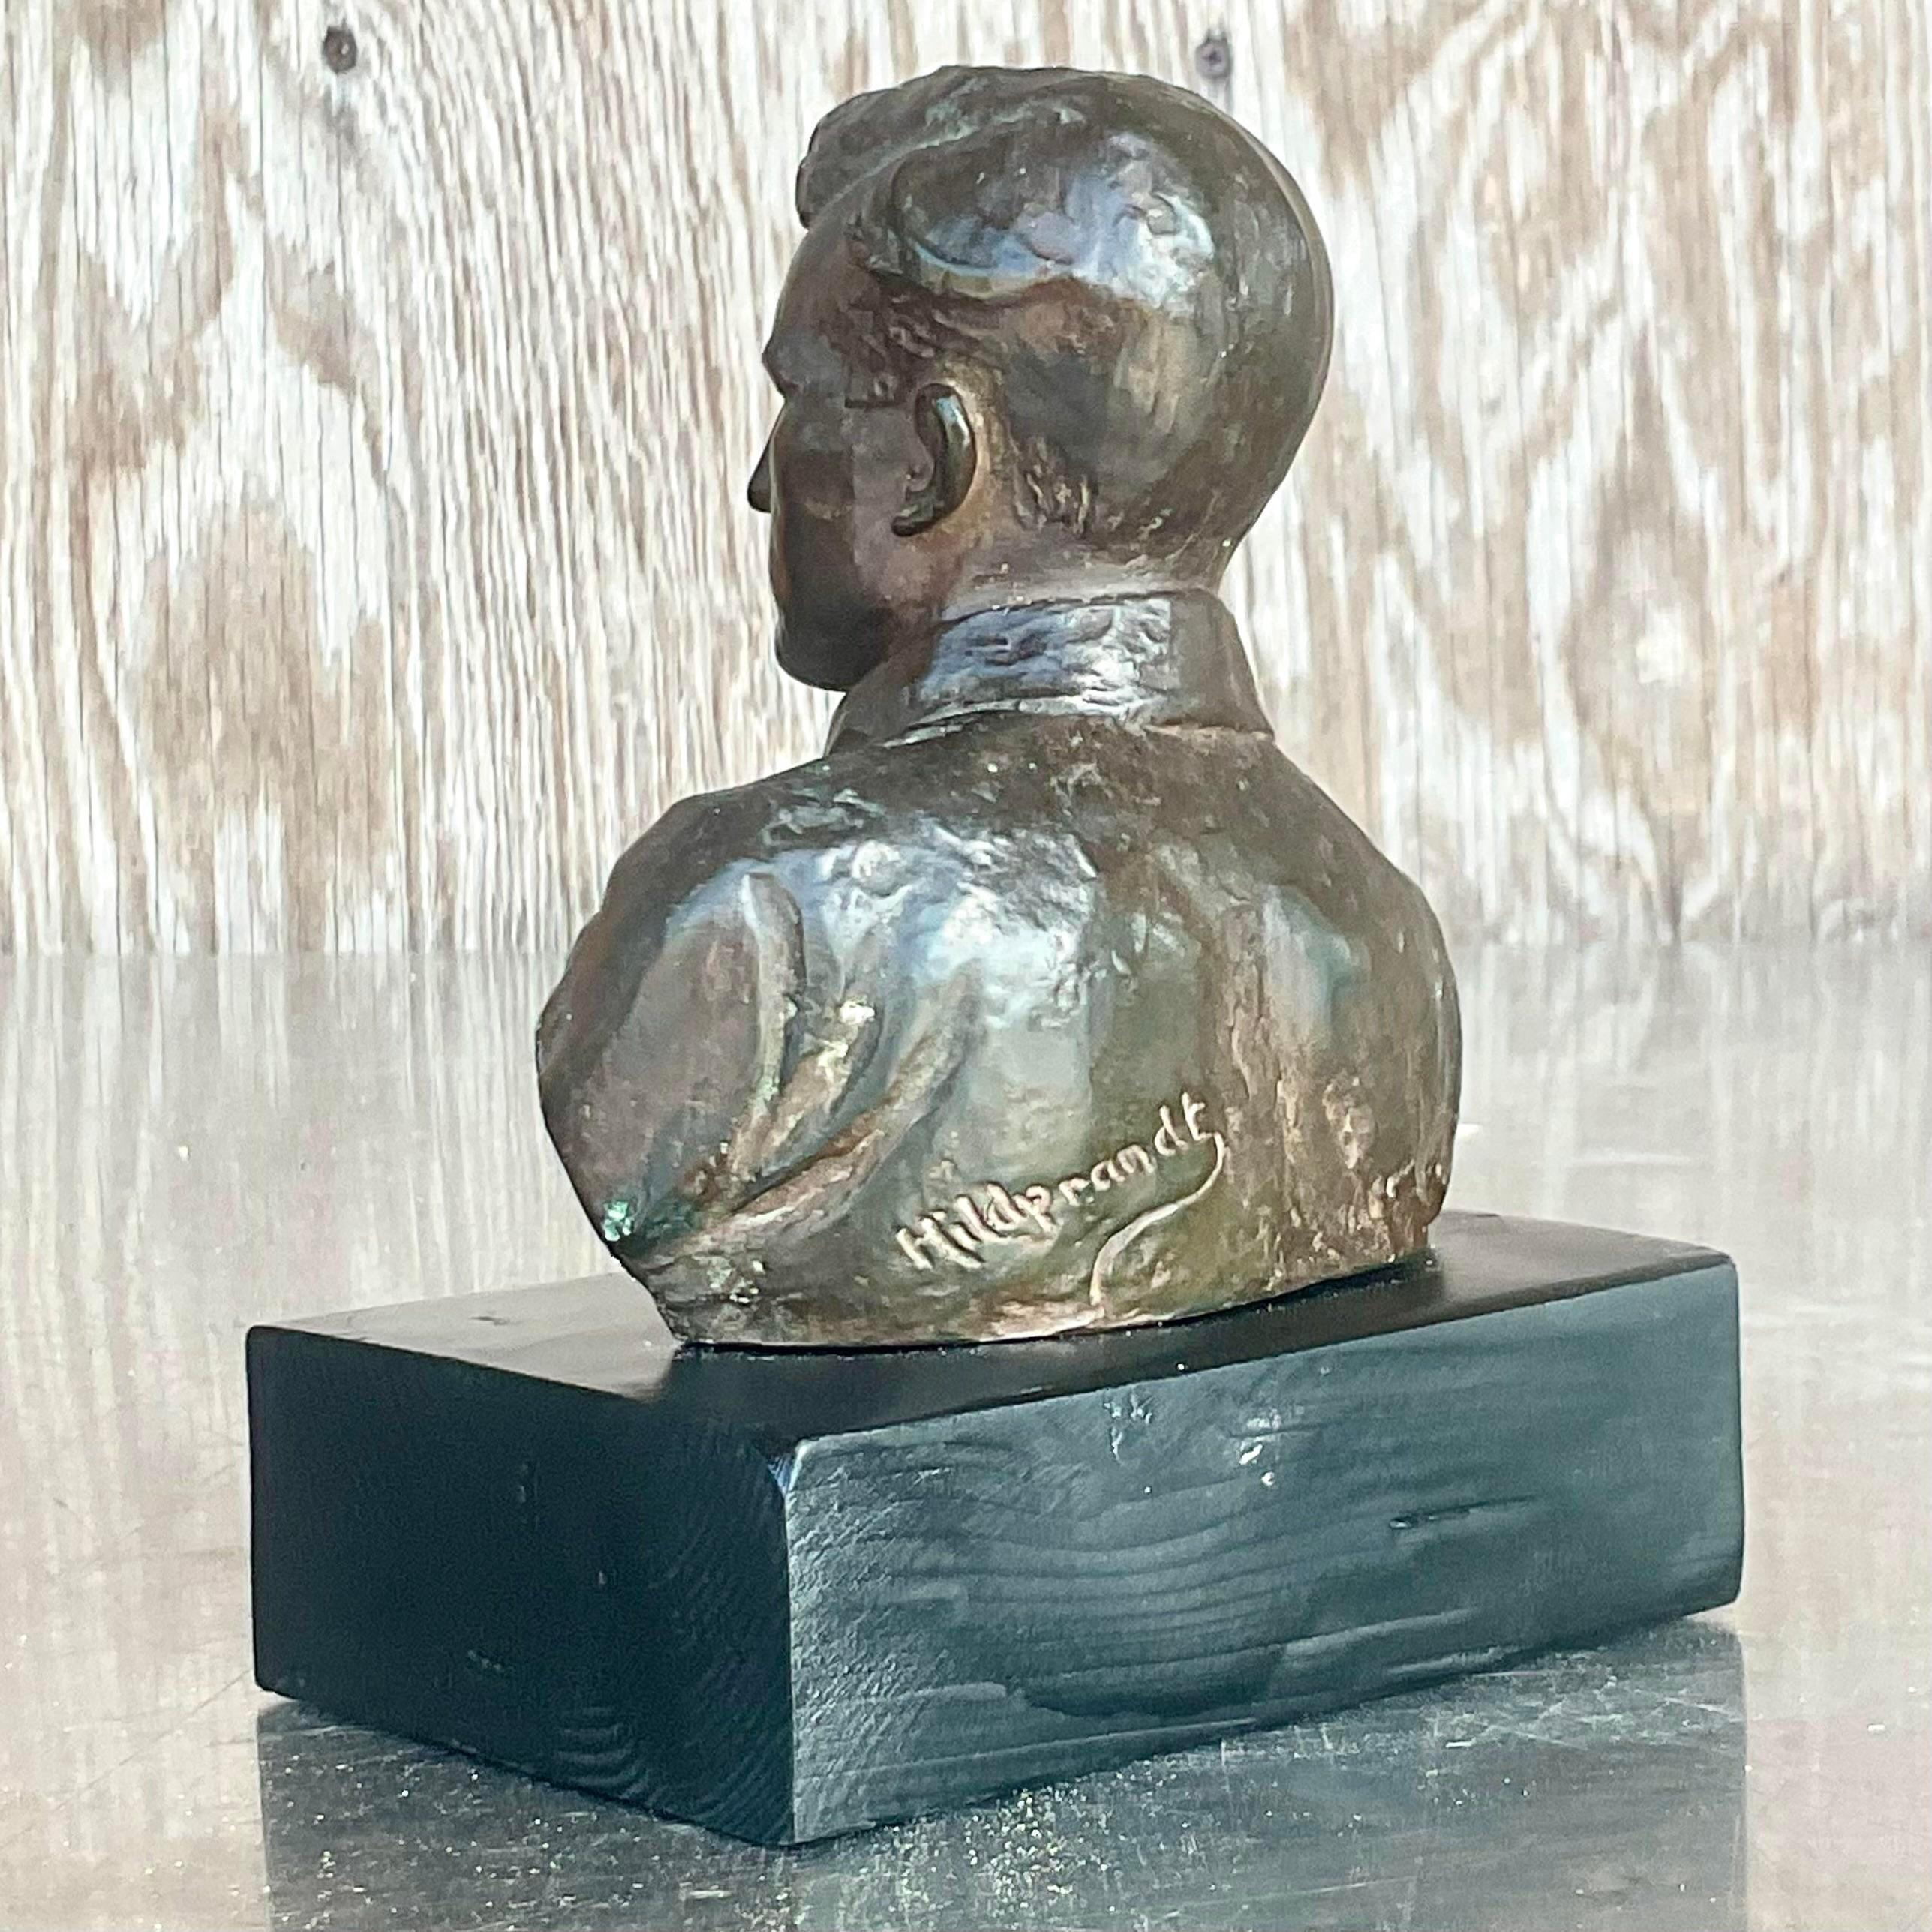 A fabulous vintage Boho plaster bust of man sculpture. A beautiful patinated bronze finish on a chic black plinth. Signed by the artist. Acquired from a Palm Beach estate. 